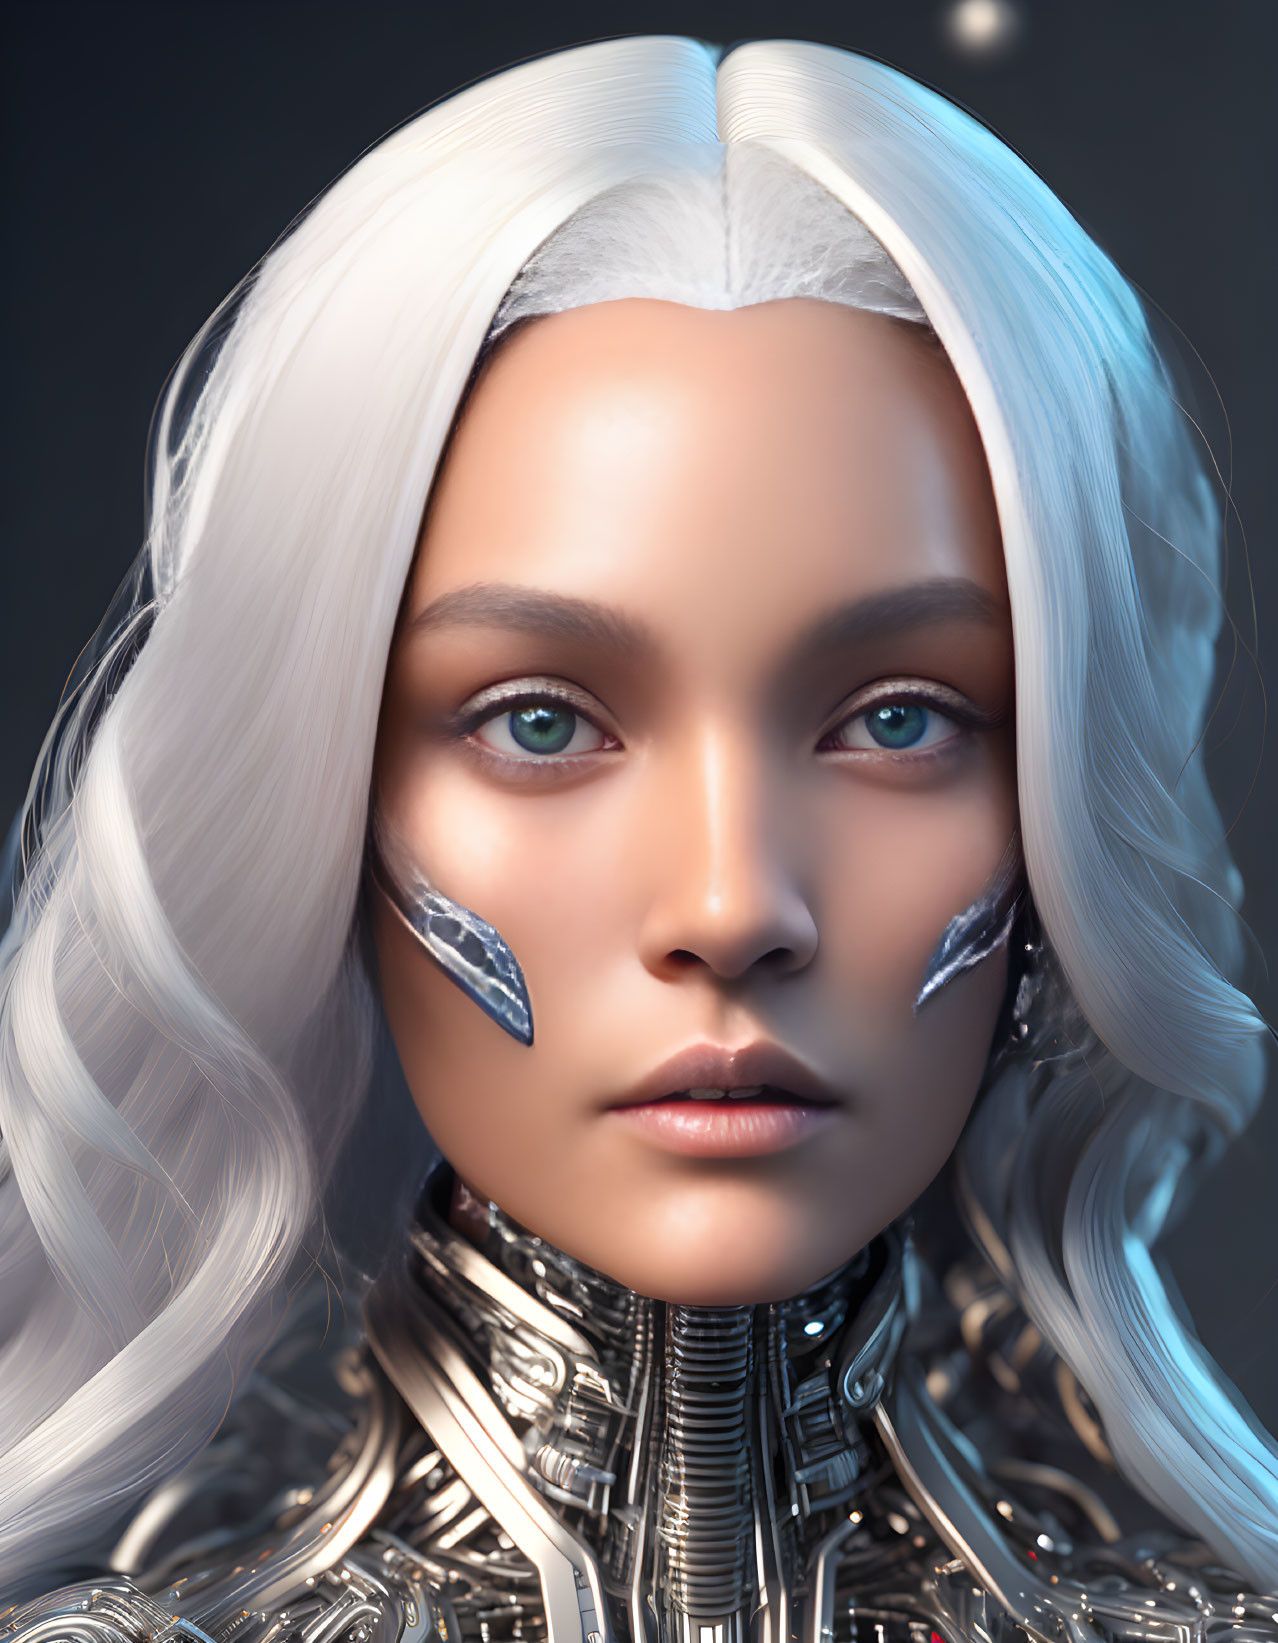 Digital portrait of female figure with blue eyes, white hair, and futuristic silver adornments